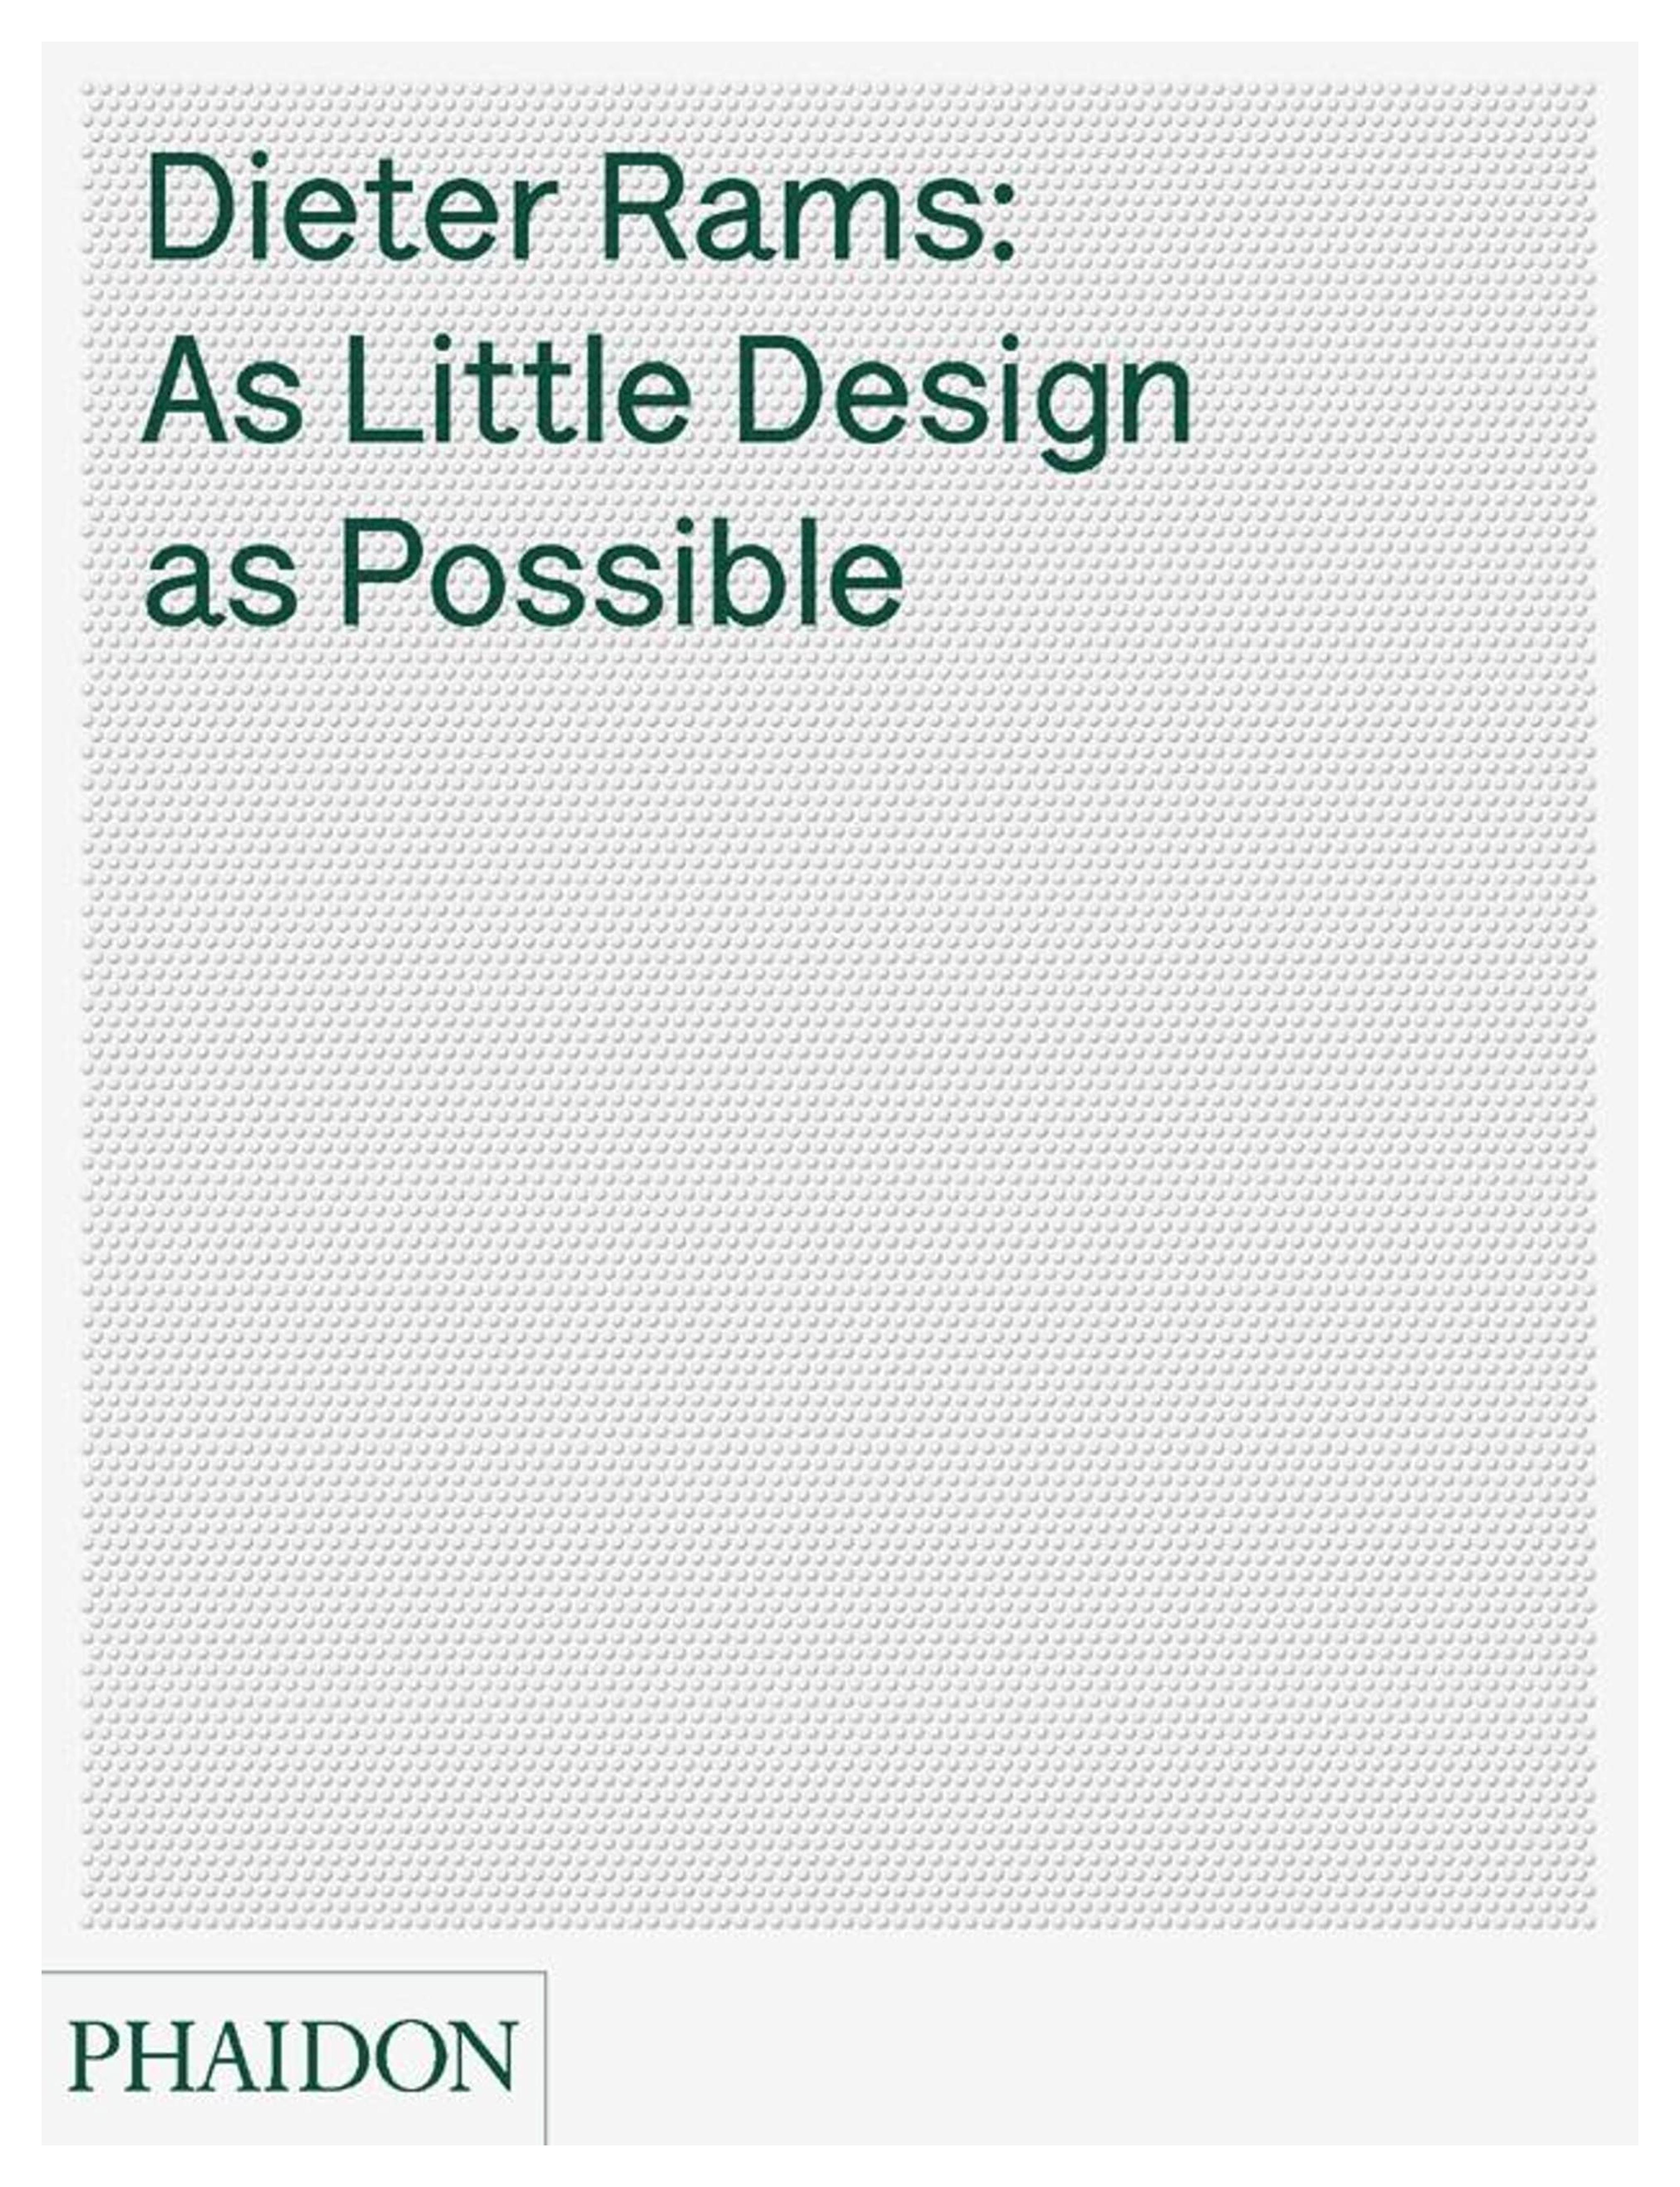 Dieter Rams: As Little Design as Possible [Hardcover]